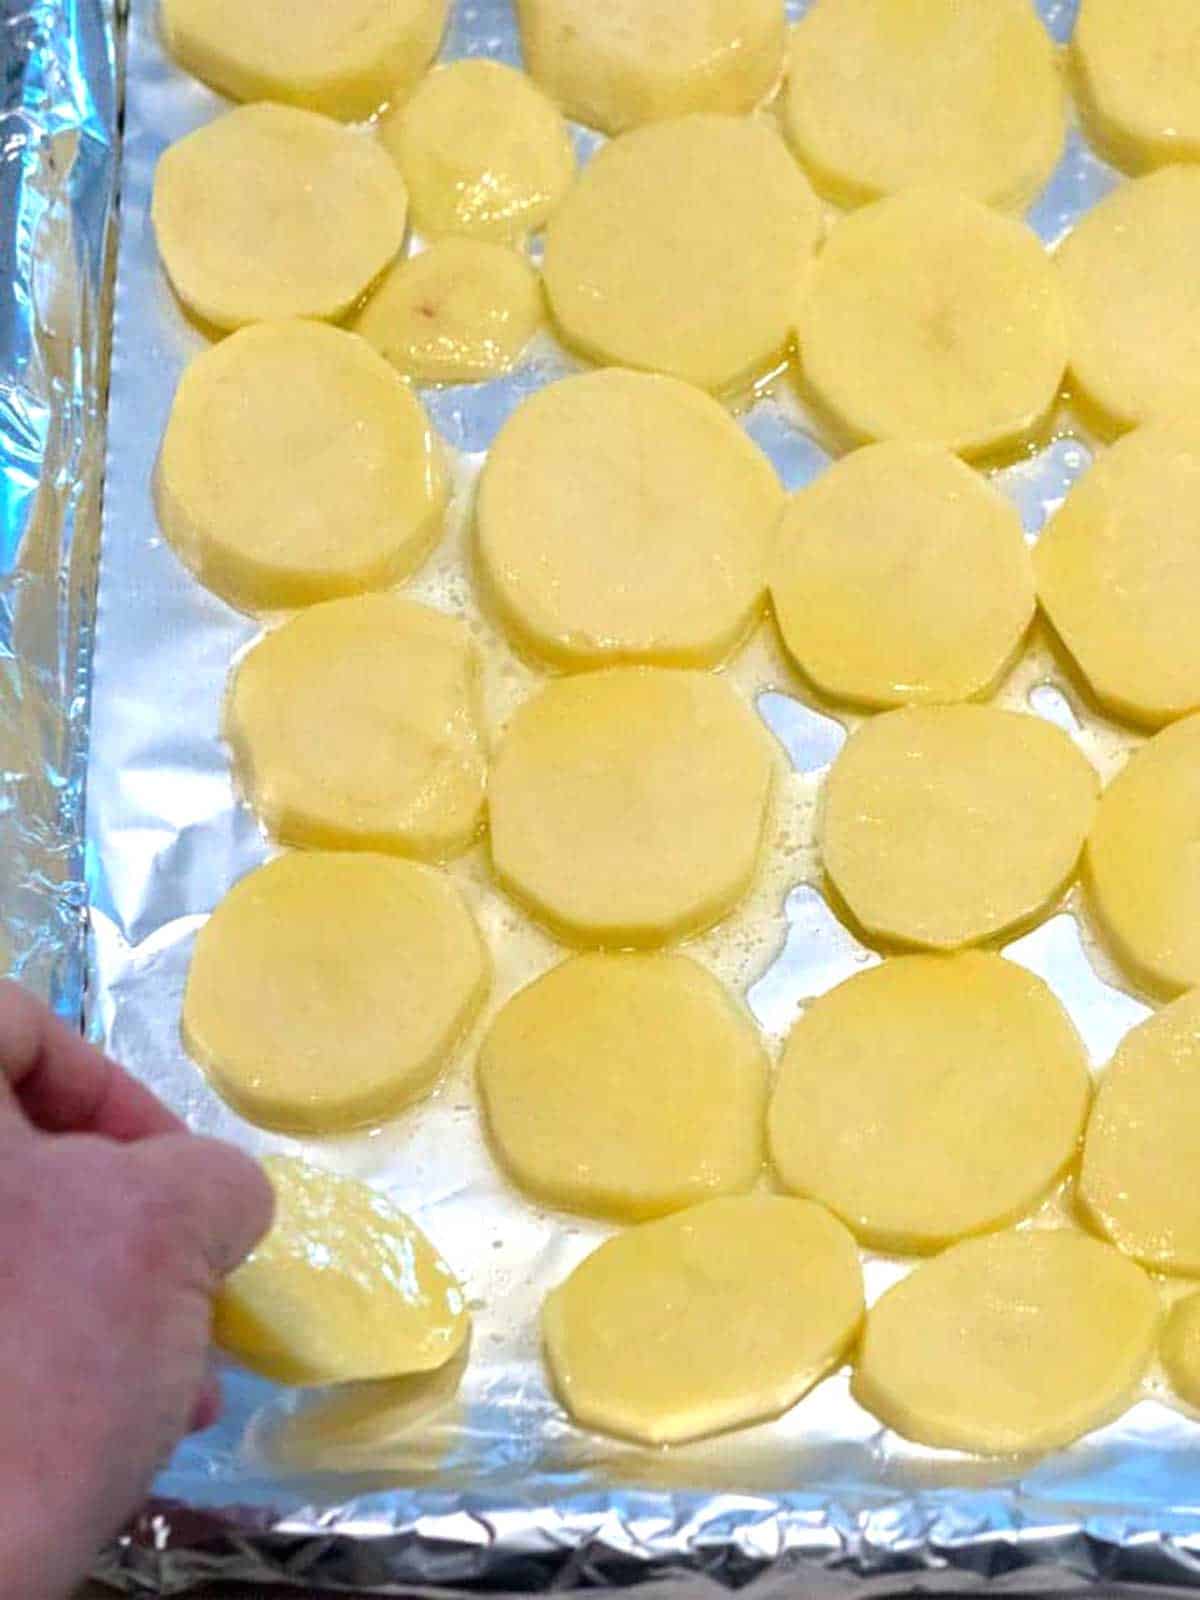 Potatoes coated in butter spread in a single layer on a baking sheet that was lined with nonstick aluminum foil.